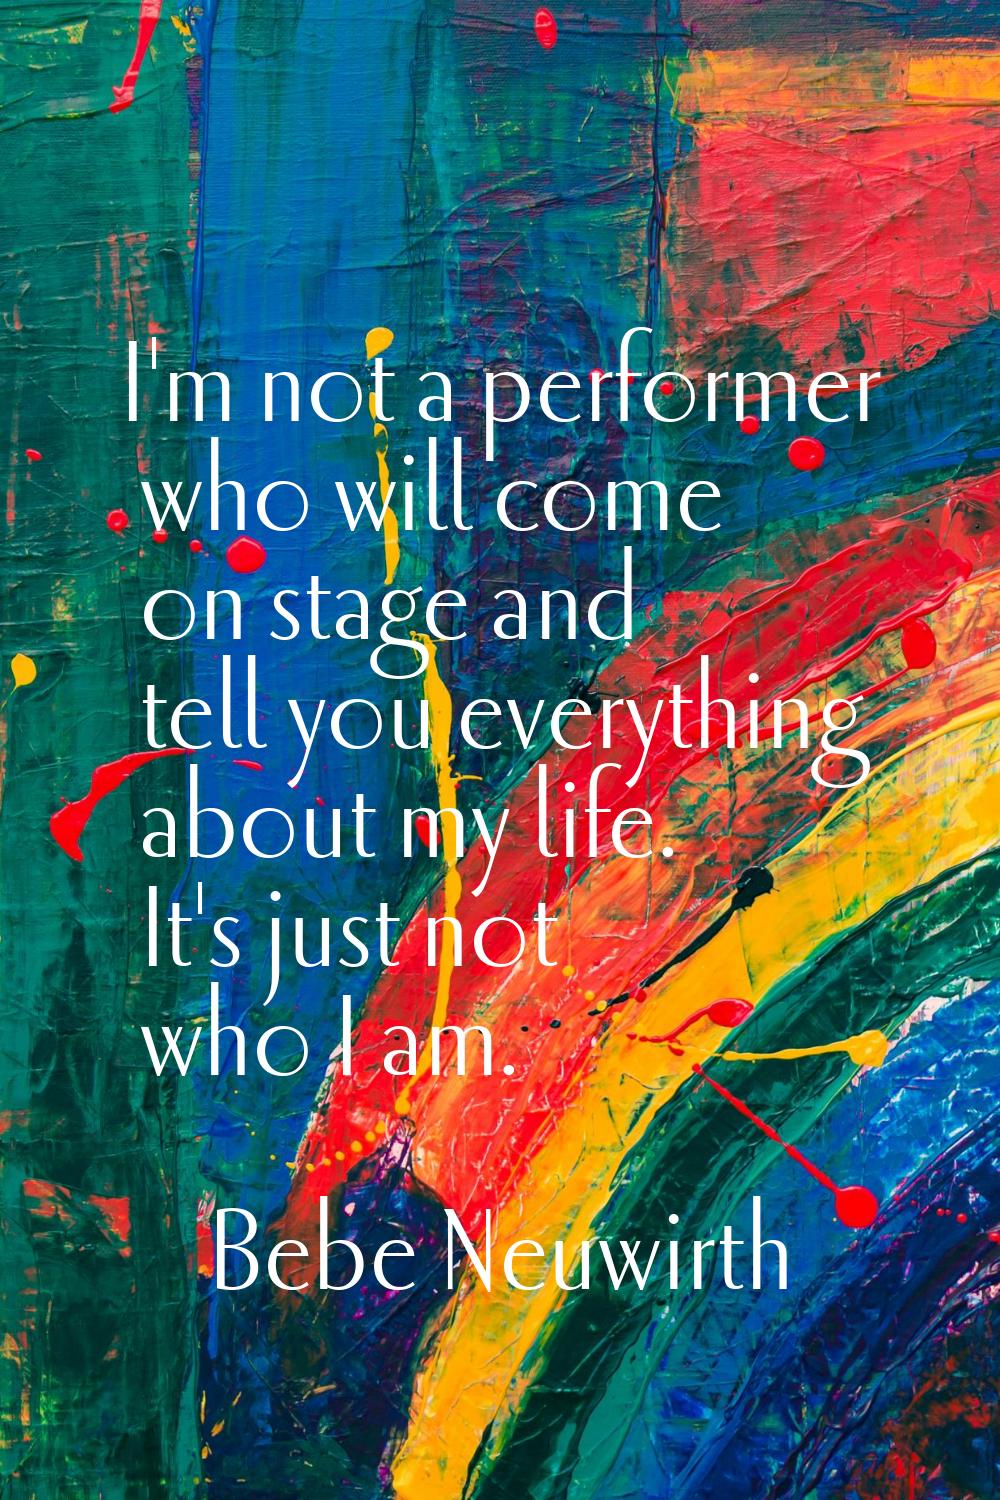 I'm not a performer who will come on stage and tell you everything about my life. It's just not who